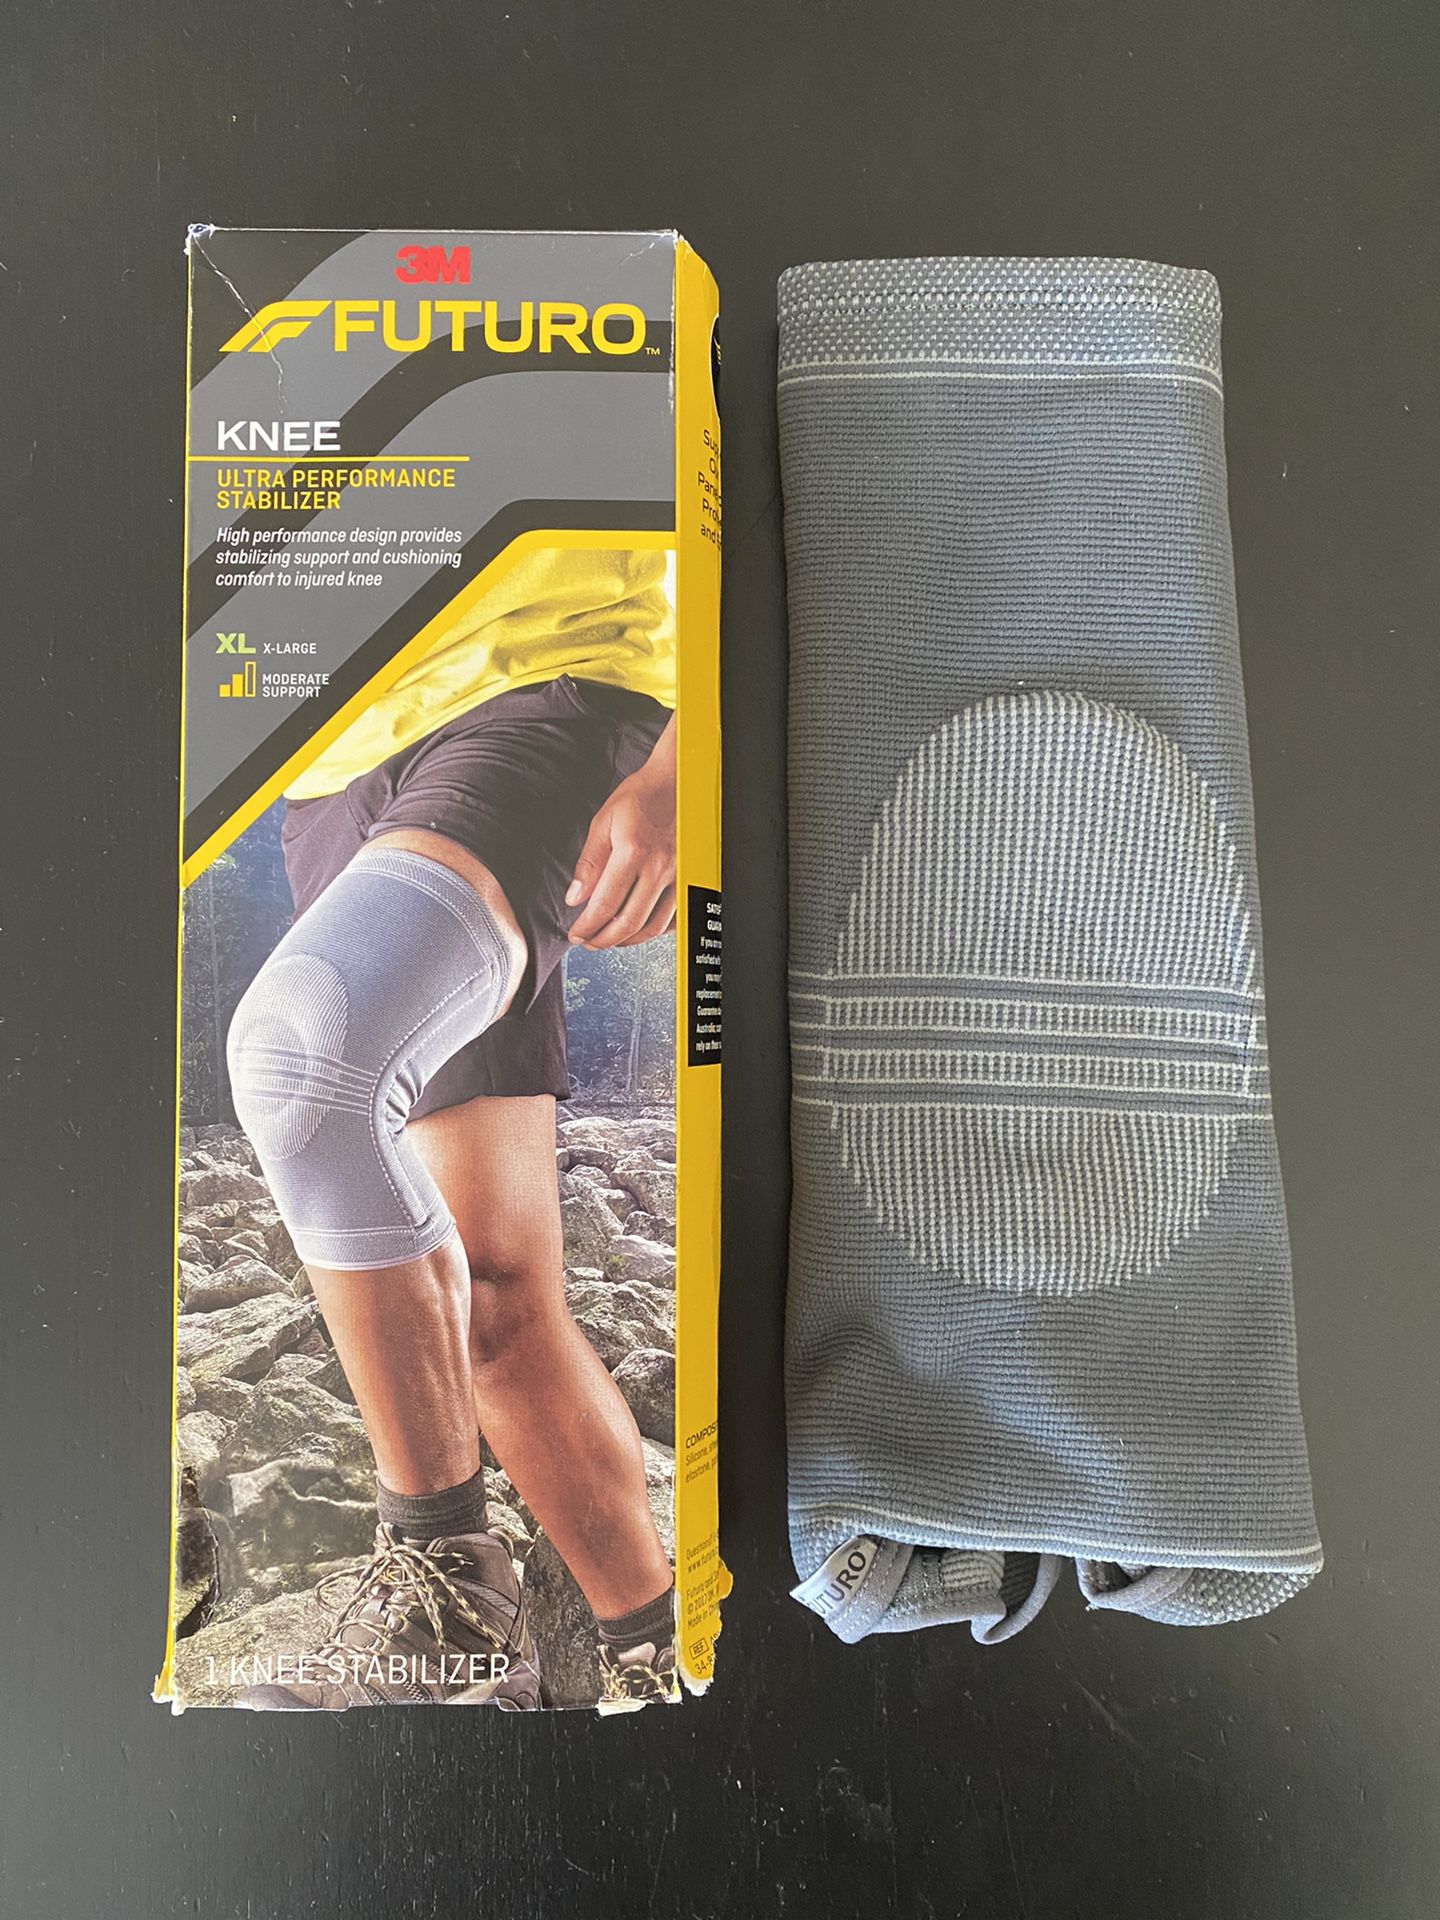 NEW FUTURO KNEE ULTRA PERFORMANCE SUPPORT STABALIZER IN GREY, XL